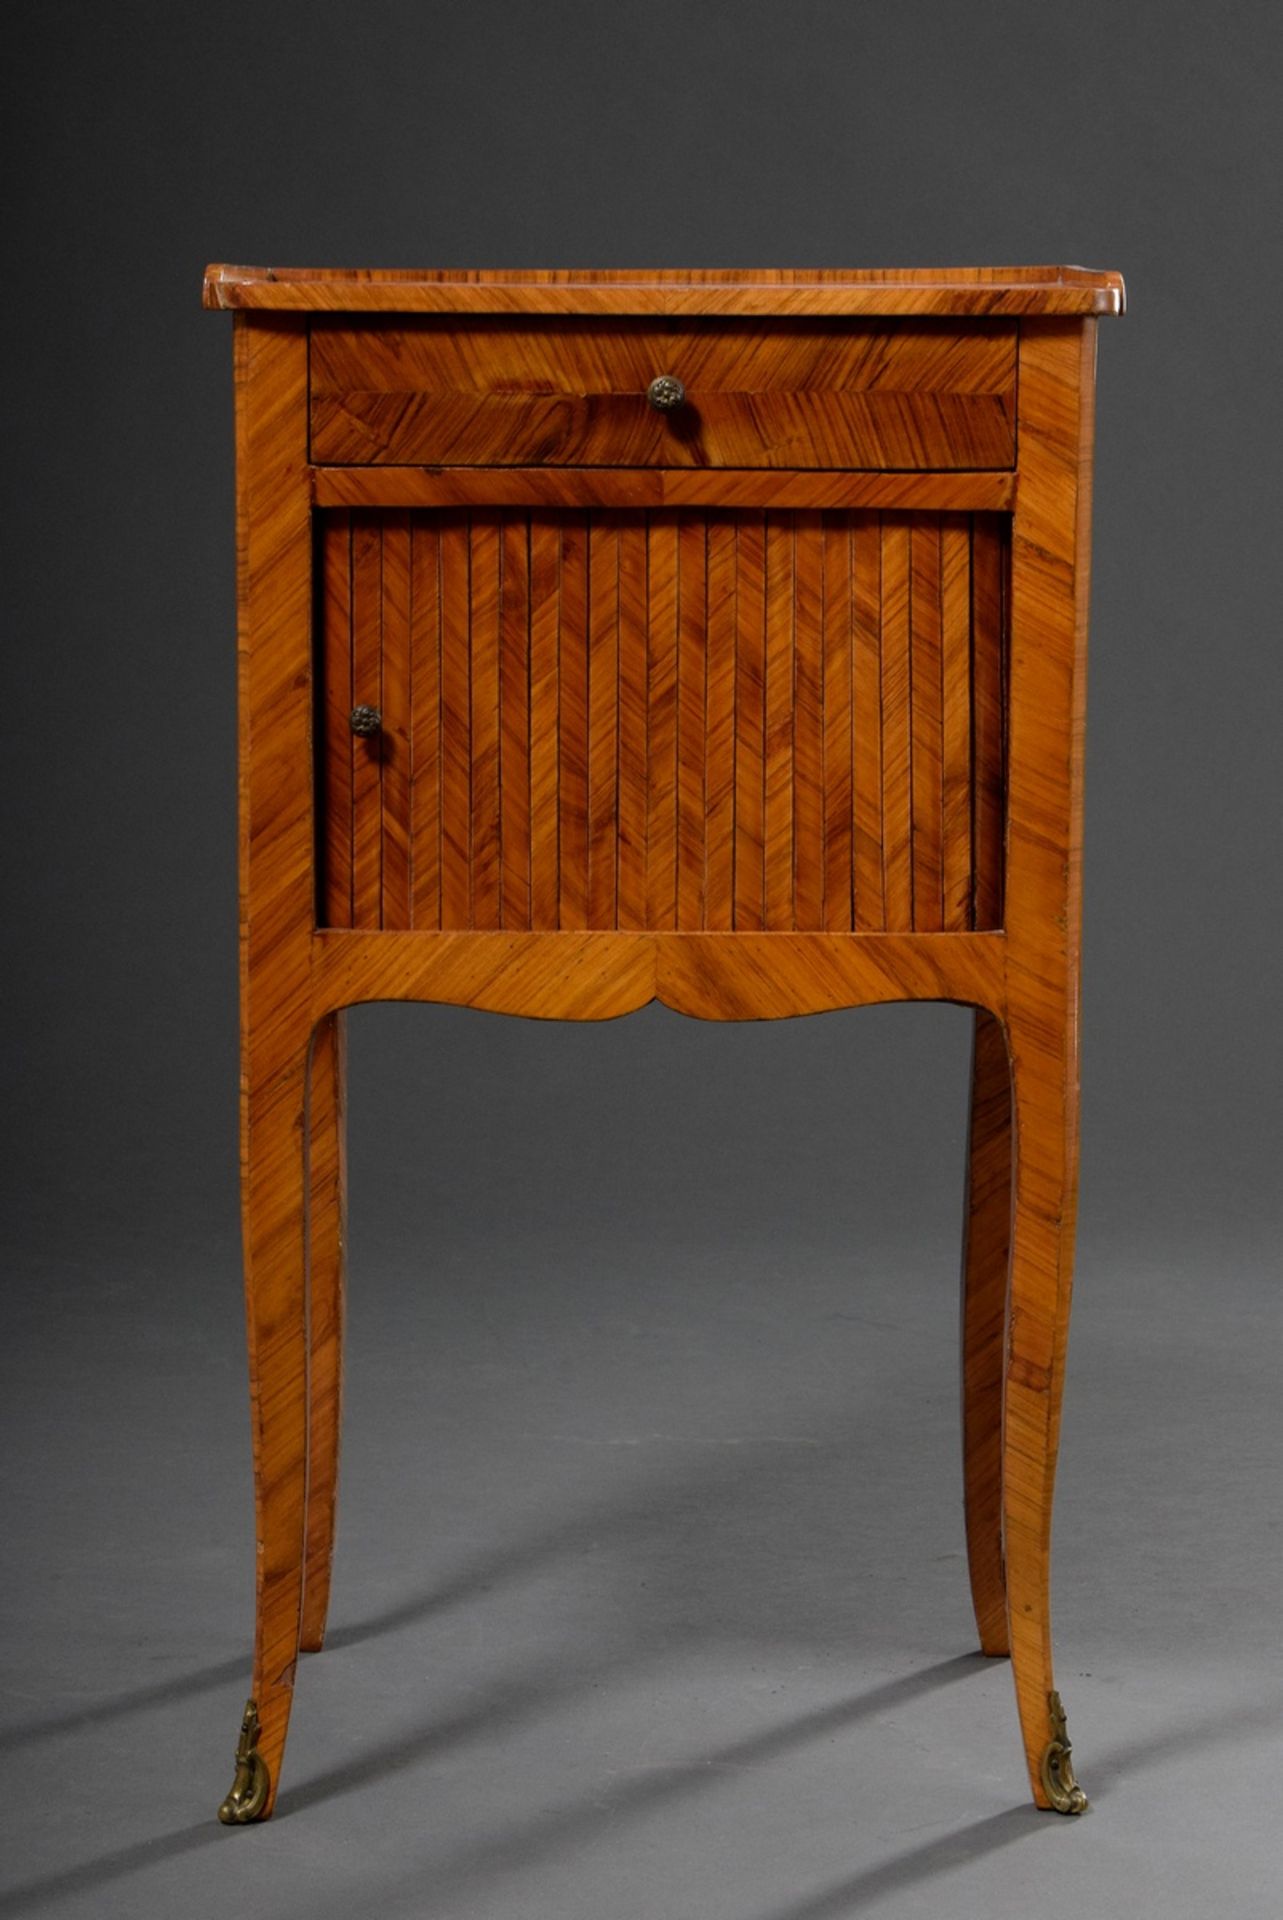 Louis XVI "Table Tricoteuse" with drawer in the frame and roll-up door, geometric rosewood marquetr - Image 2 of 7